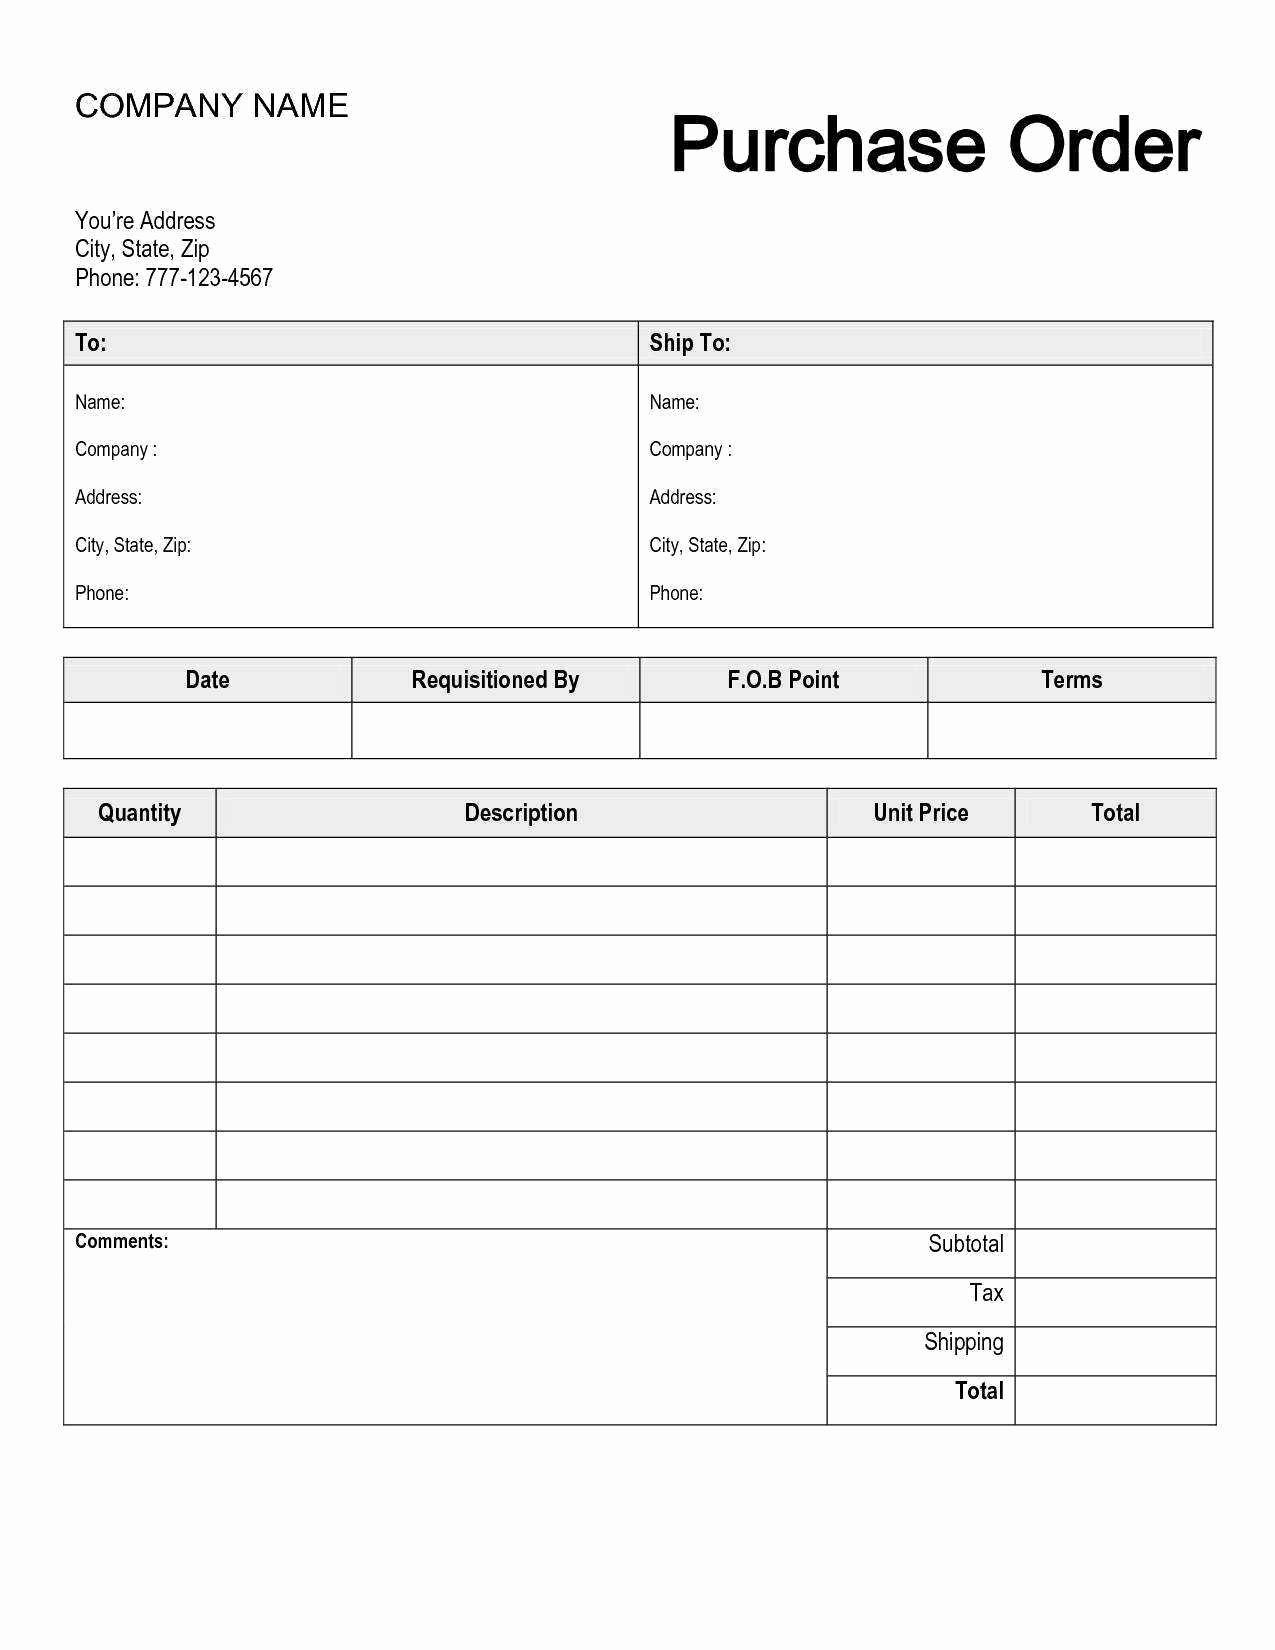 Excel order form Template Inspirational Free Purchase order form Template Excel Image – 53